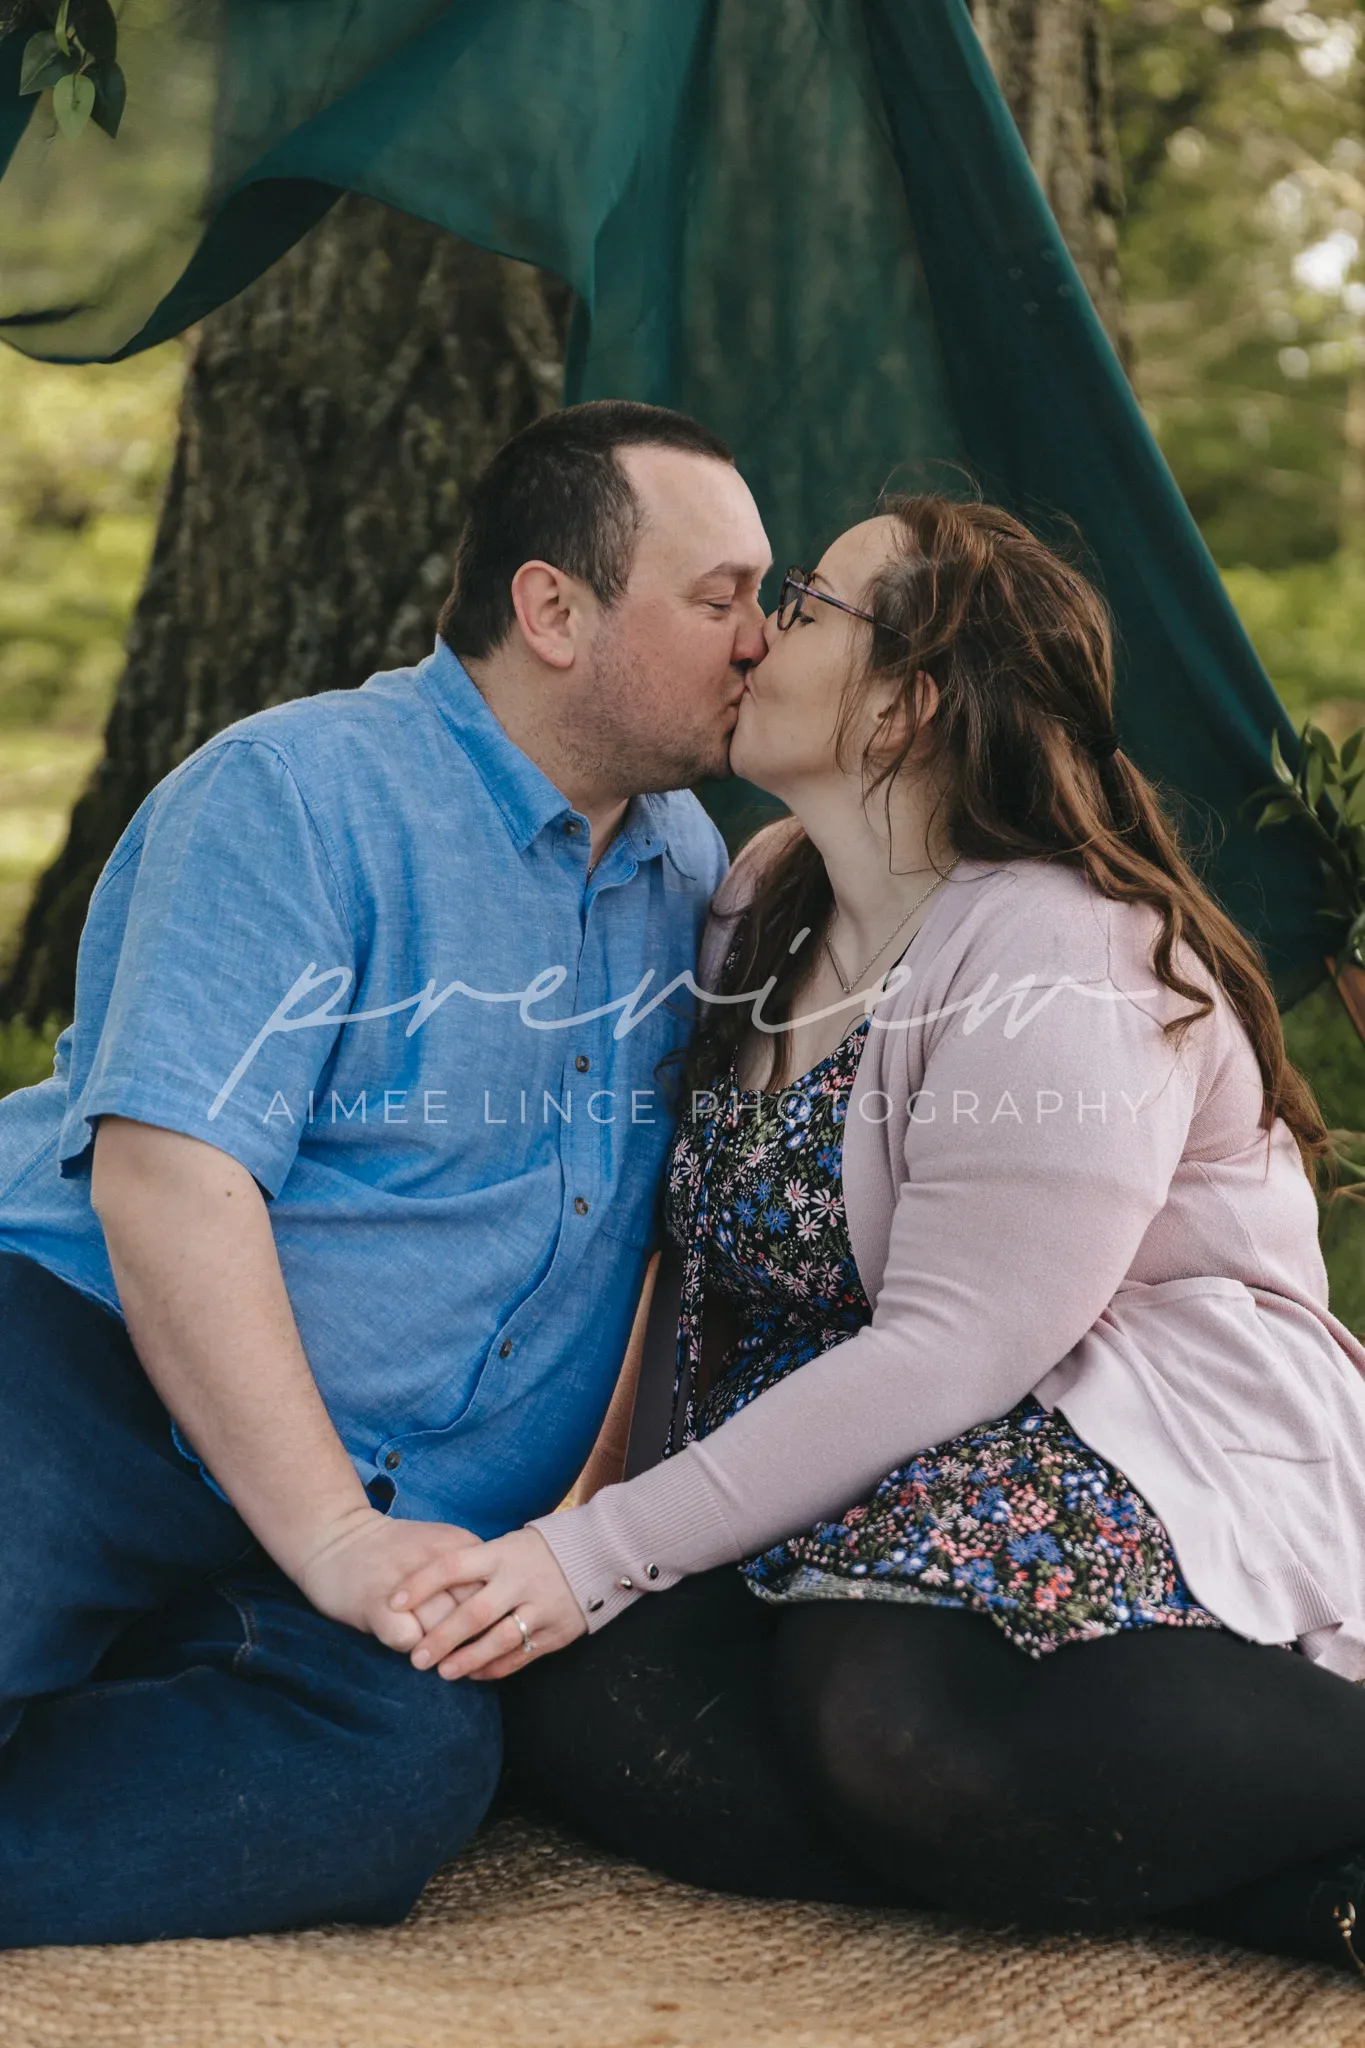 A couple sits on a blanket under a tree, kissing. The man wears a blue shirt, and the woman, named Ashley, wears a pink cardigan over a floral dress. The environment suggests a